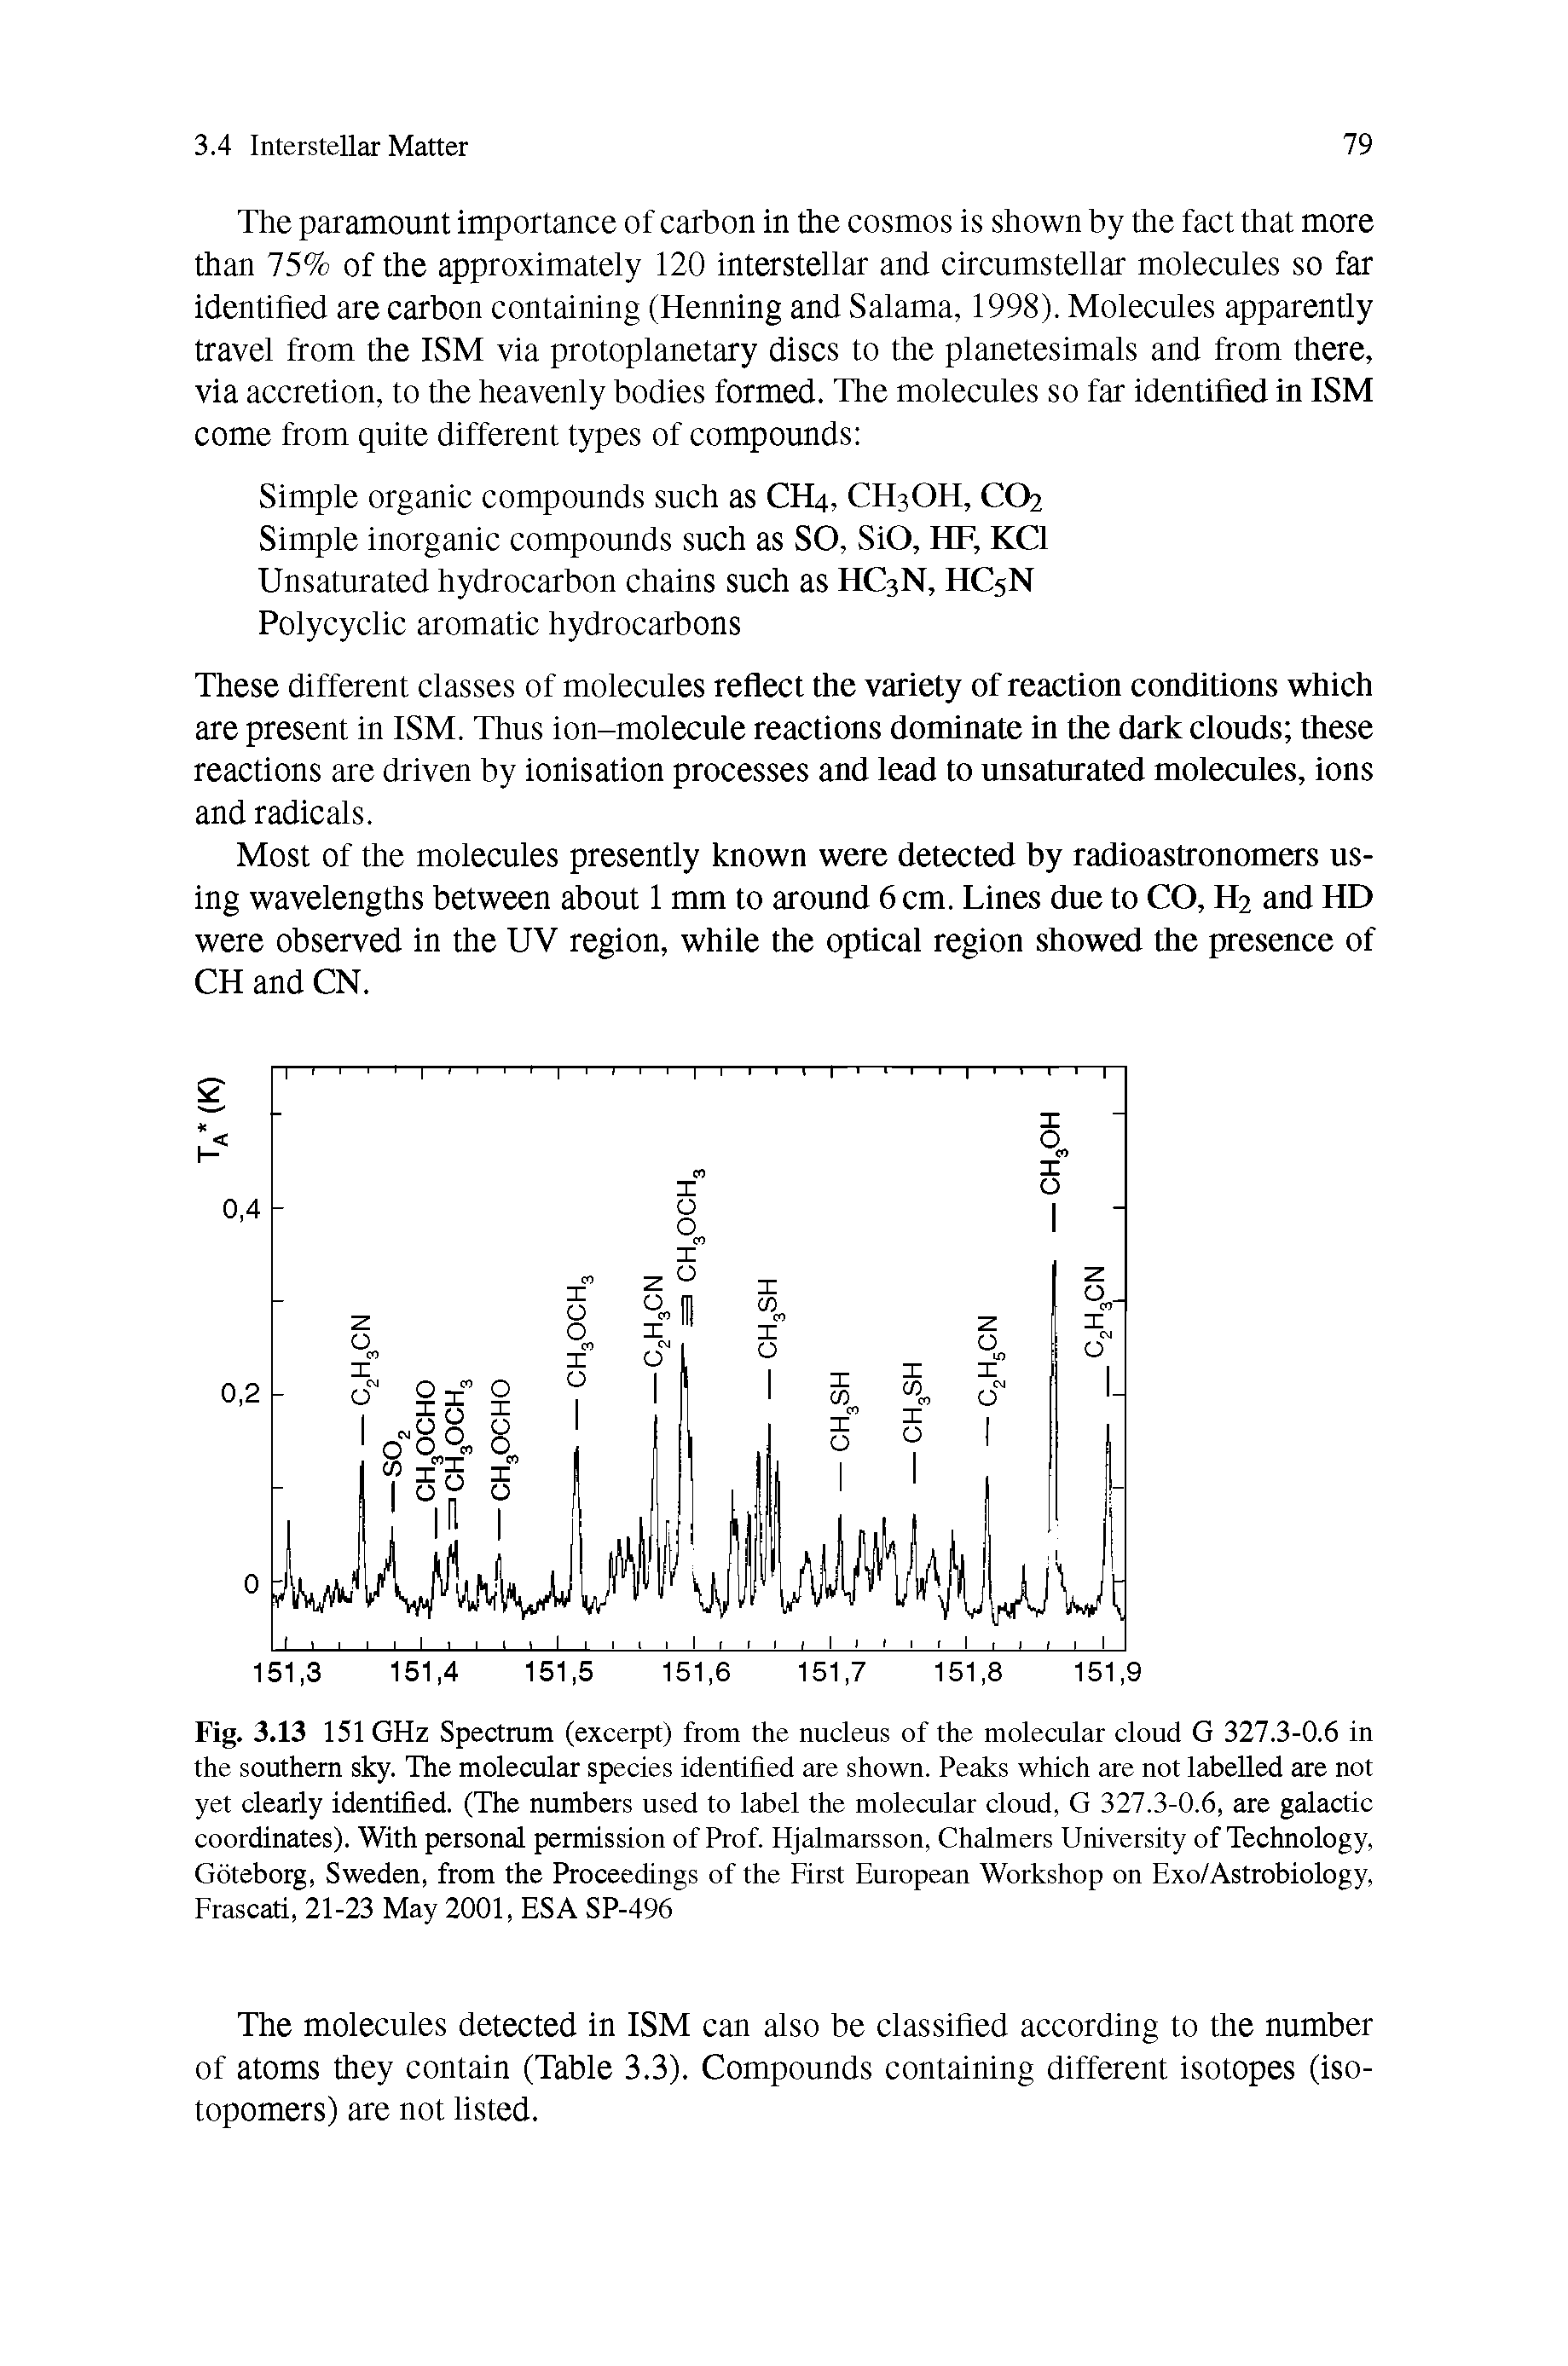 Fig. 3.13 151 GHz Spectrum (excerpt) from the nucleus of the molecular cloud G 327.3-0.6 in the southern sky. The molecular species identified are shown. Peaks which are not labelled are not yet clearly identified. (The numbers used to label the molecular cloud, G 327.3-0.6, are galactic coordinates). With personal permission of Prof. Hjalmarsson, Chalmers University of Technology, Goteborg, Sweden, from the Proceedings of the First European Workshop on Exo/Astrobiology, Frascati, 21-23 May 2001, ESA SP-496...